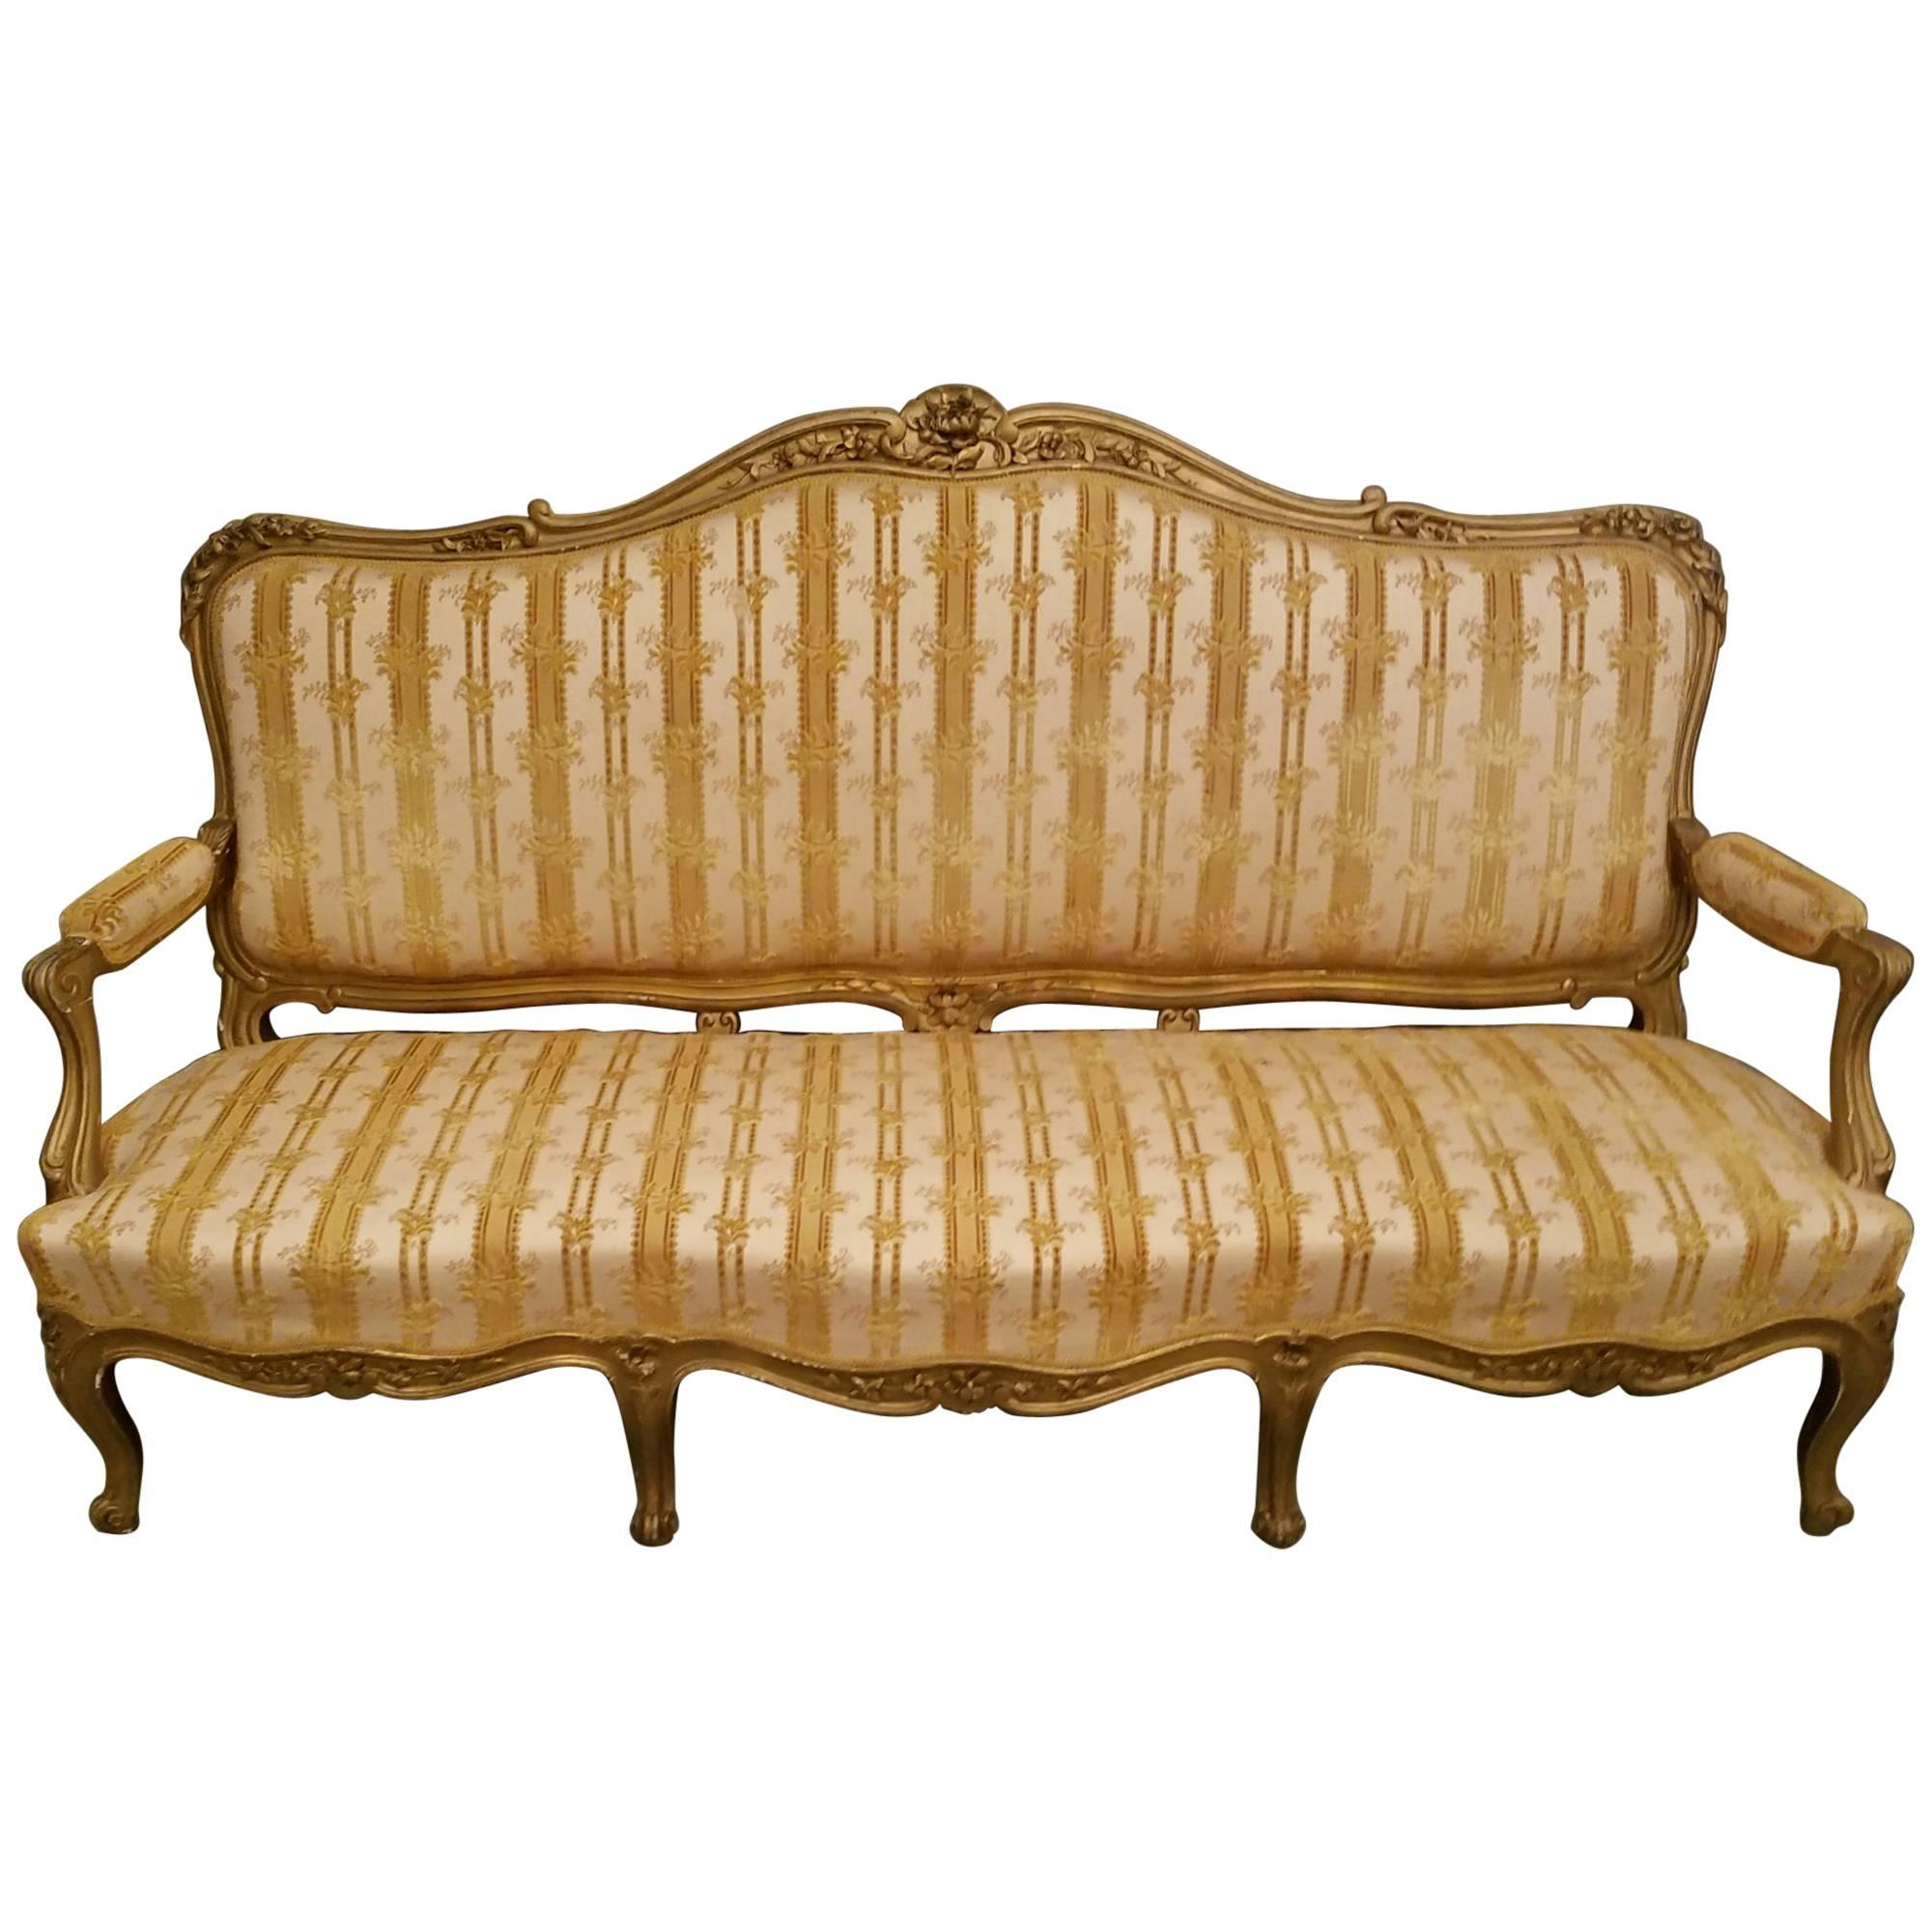 19th Century Louis XV Caved and Gilded Canape For Sale